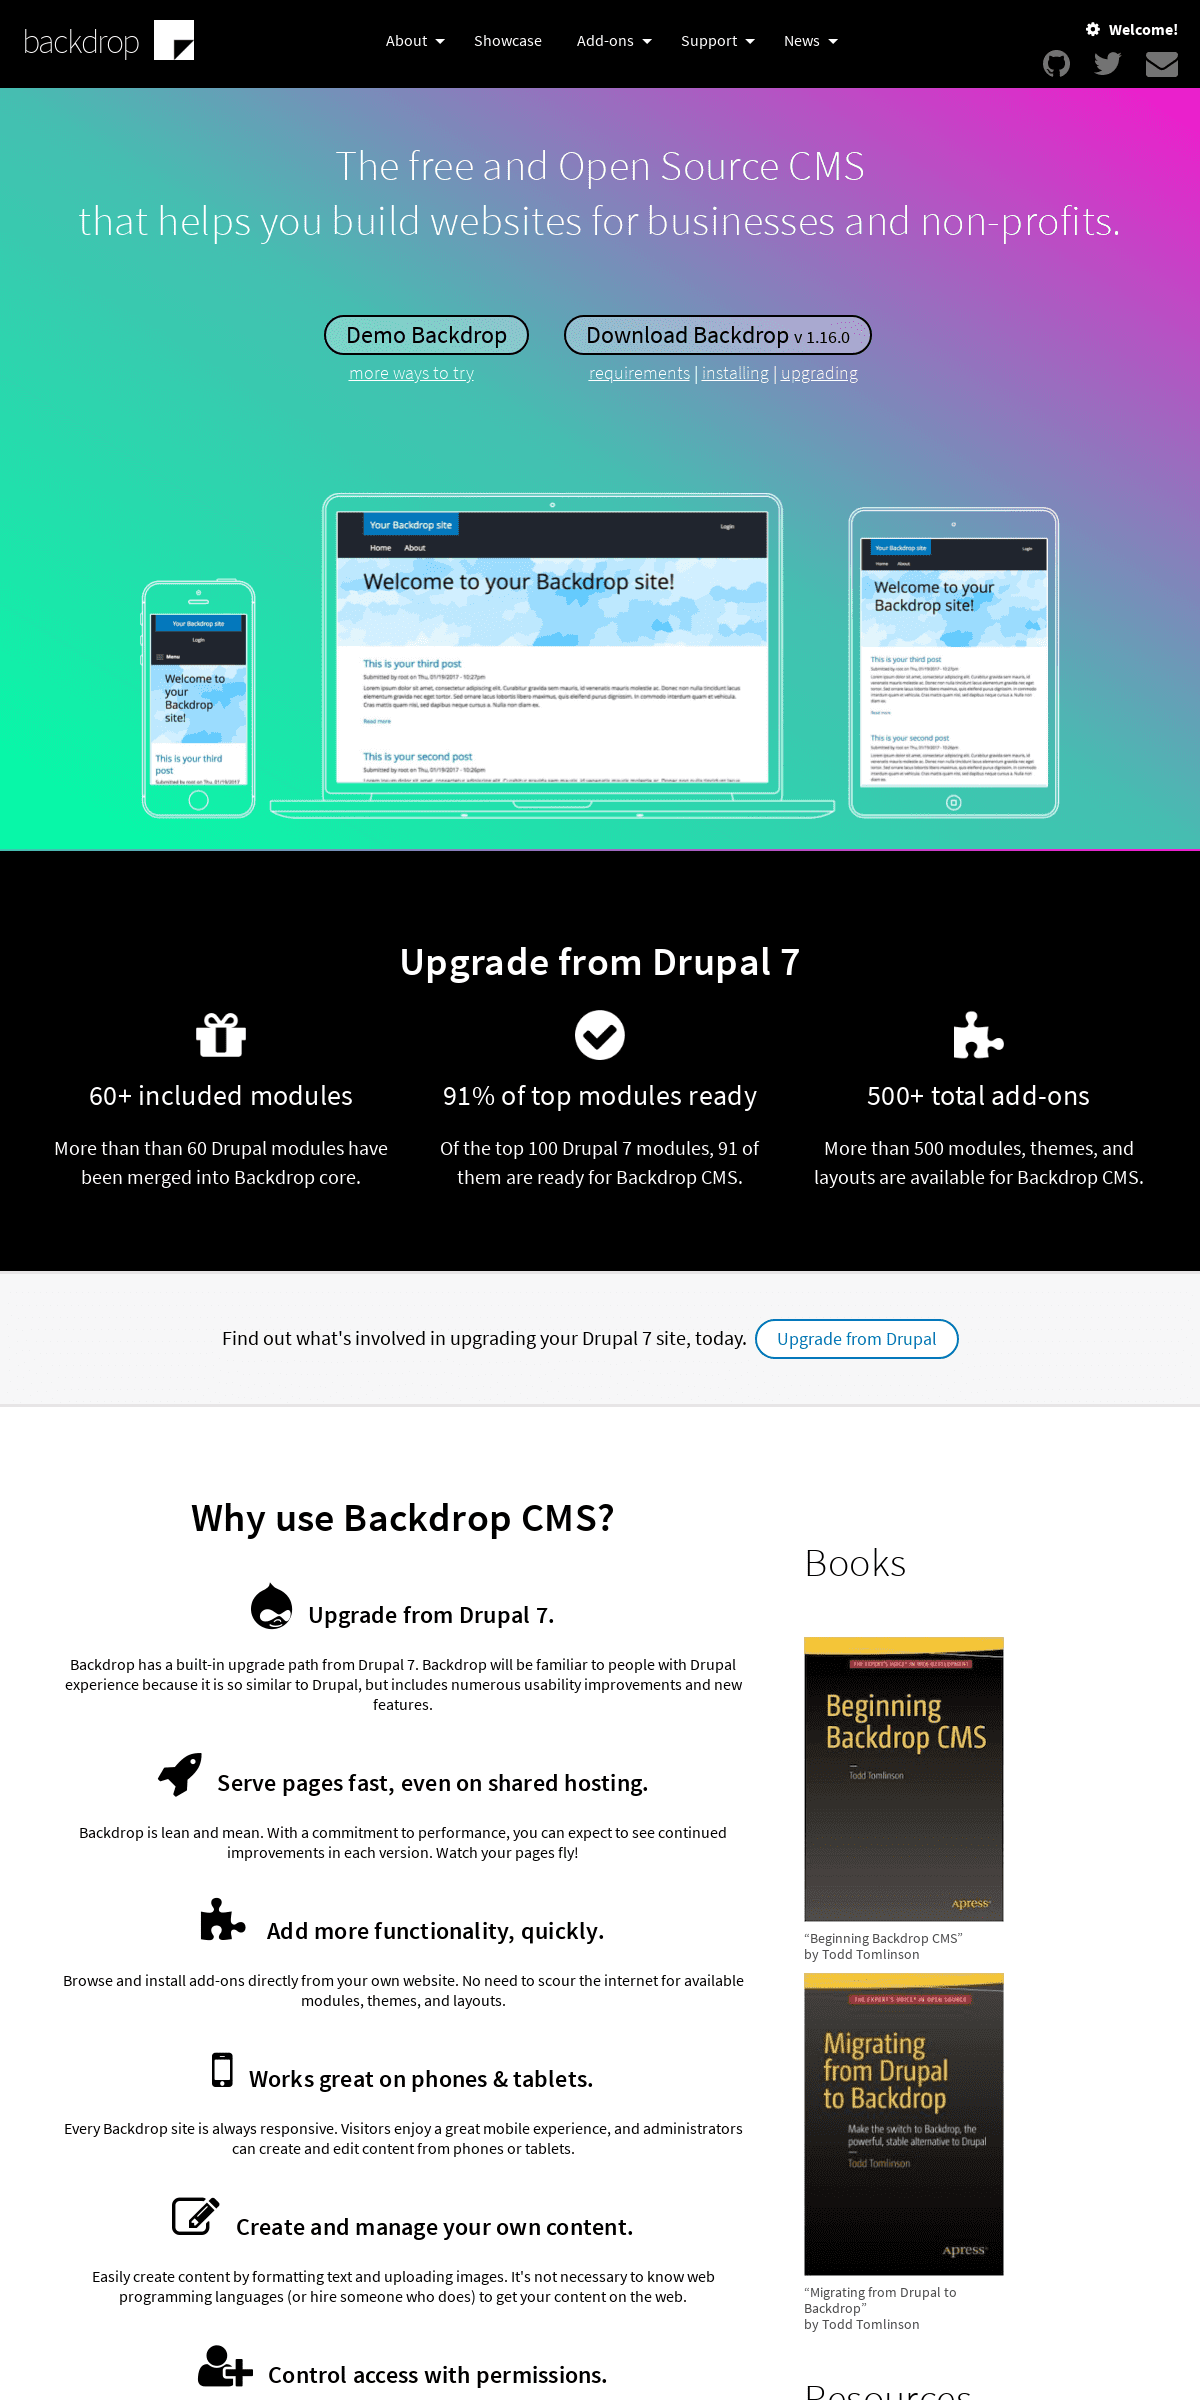 A complete backup of backdropcms.org